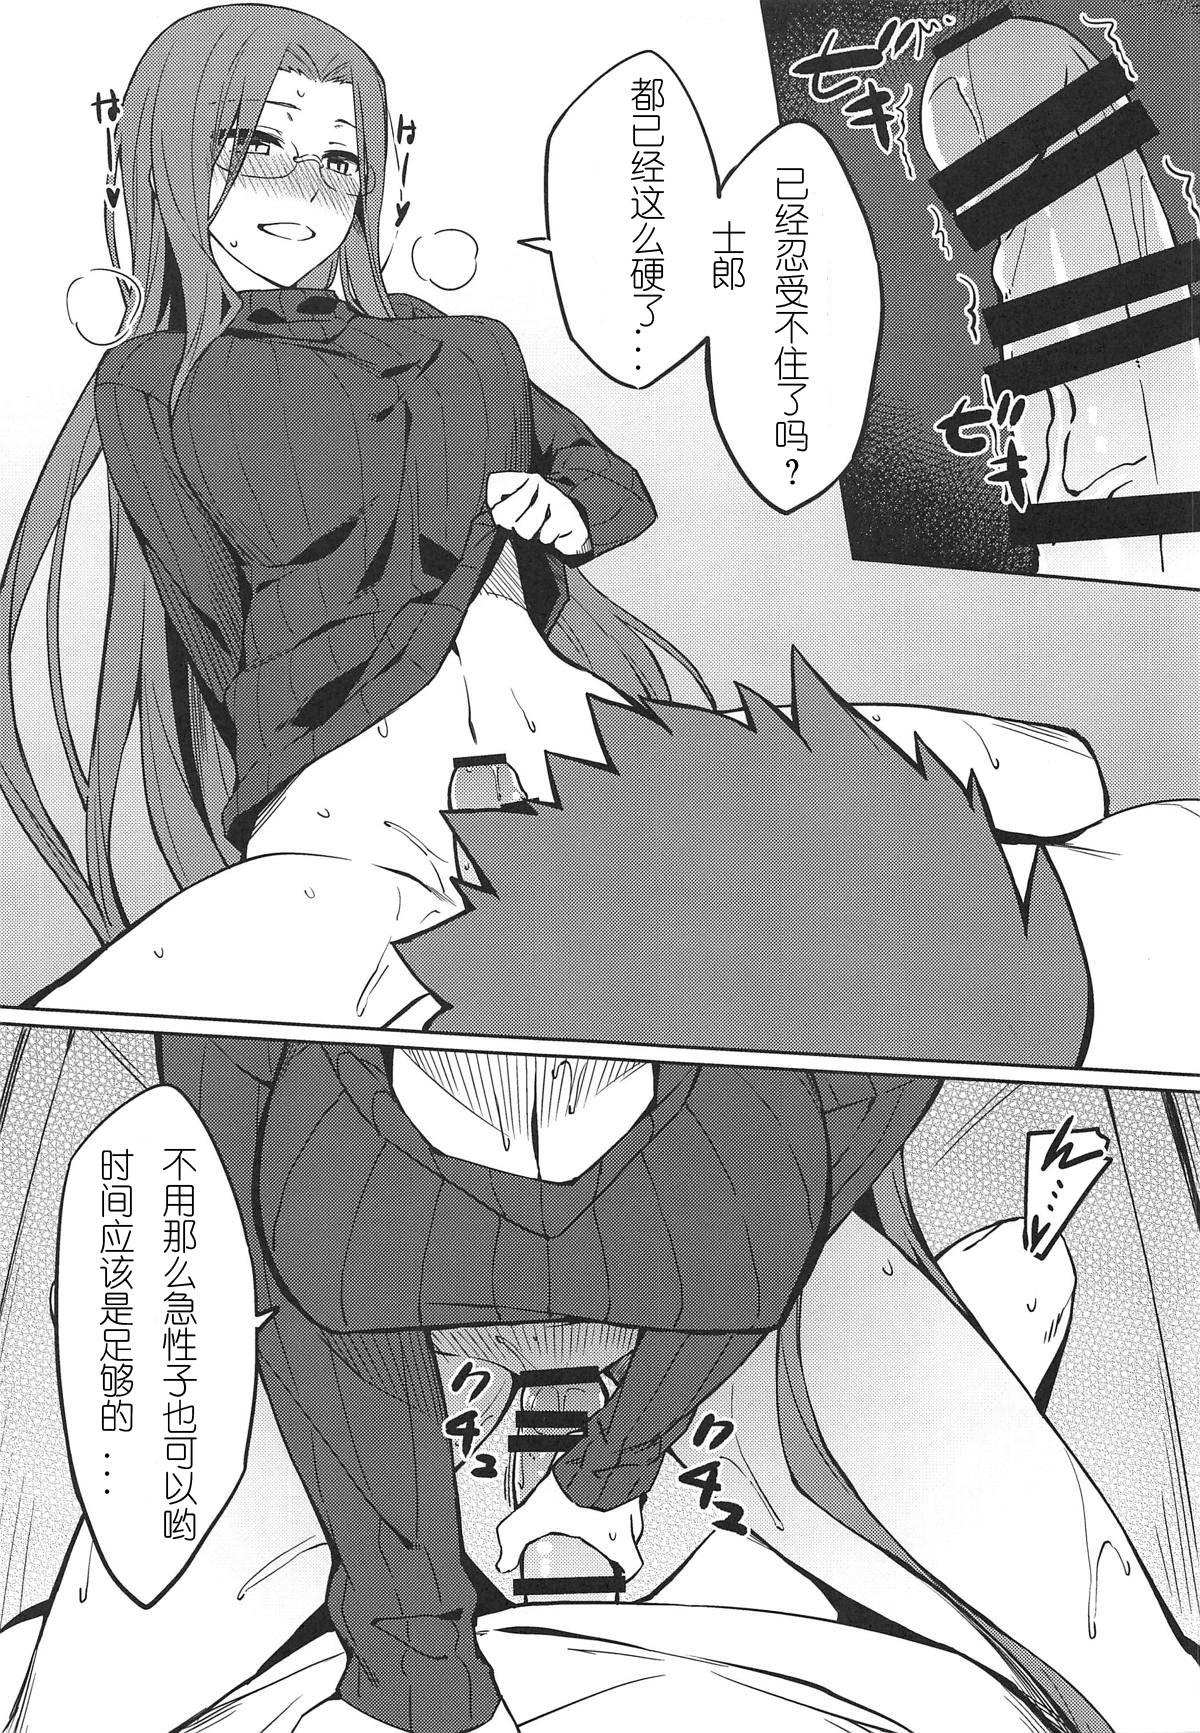 Gaping Rider-san to no Ichinichi. - Fate stay night Cougars - Page 8